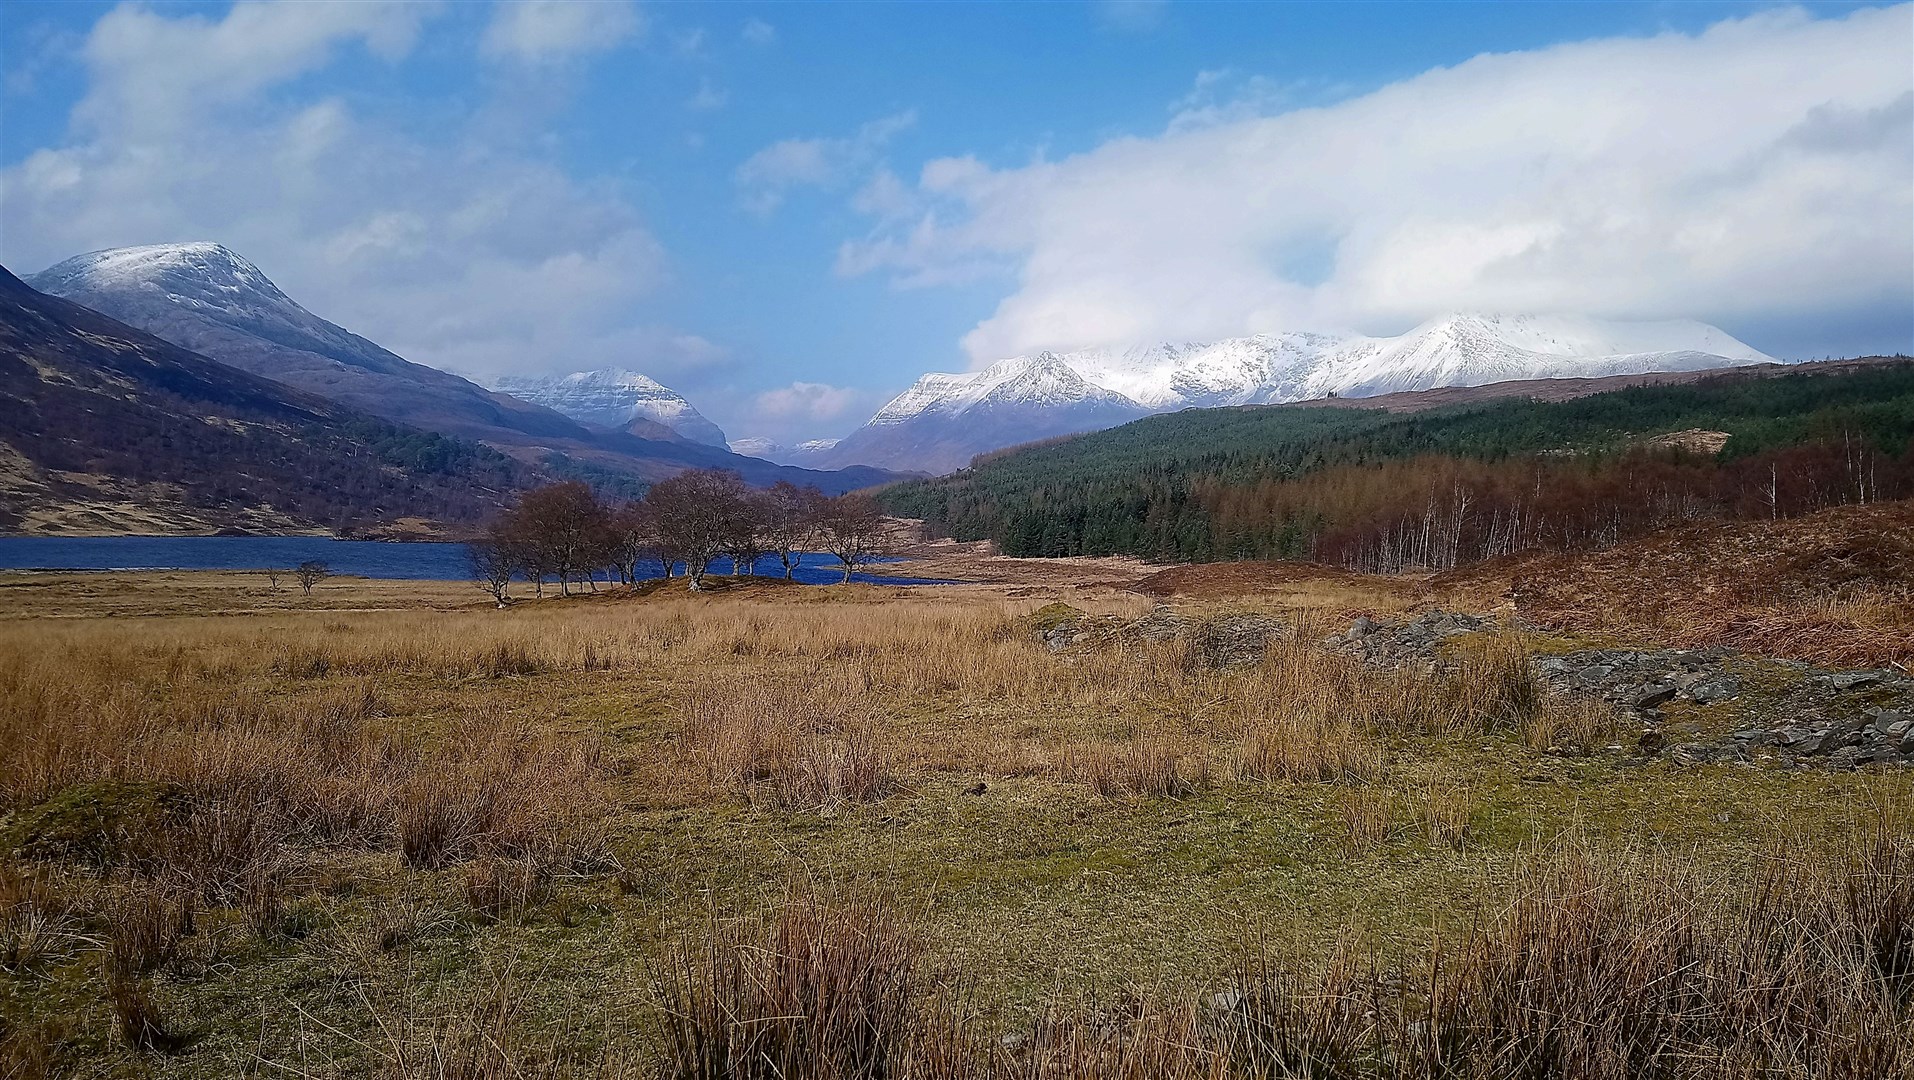 Looking across Loch Coulin towards Beinn Eighe and Liathach. Picture by Philip Murray.